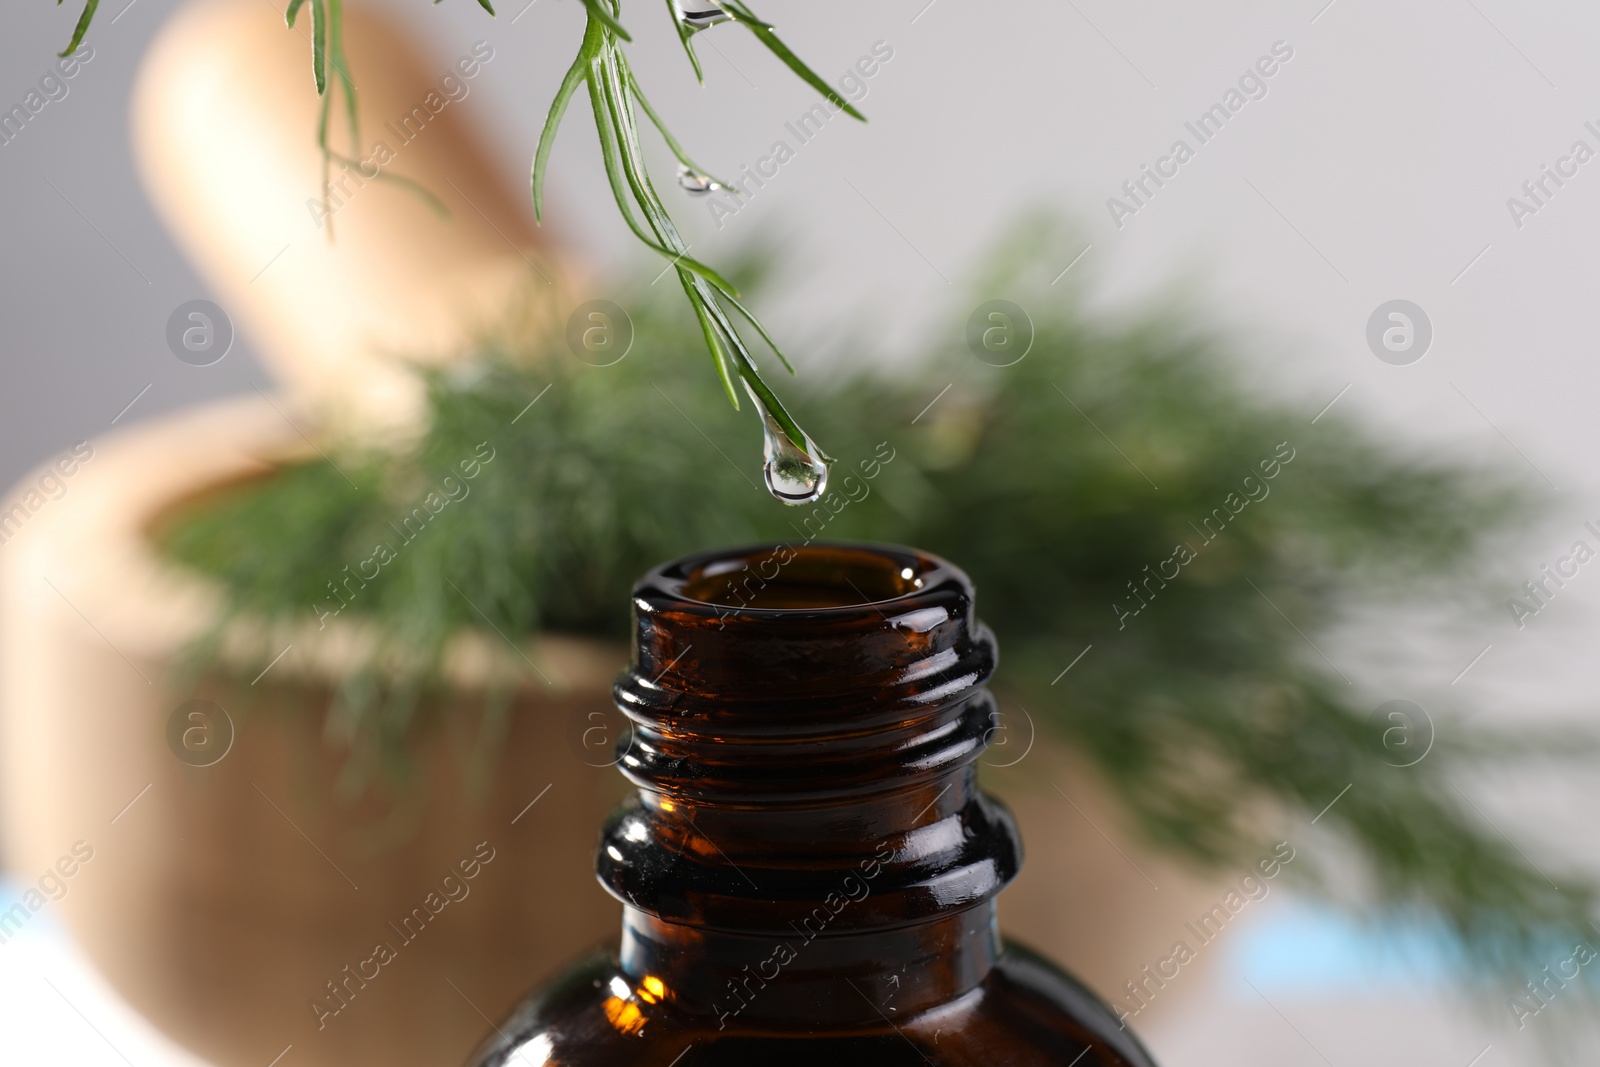 Photo of Dripping essential oil from dill into bottle on blurred background, closeup